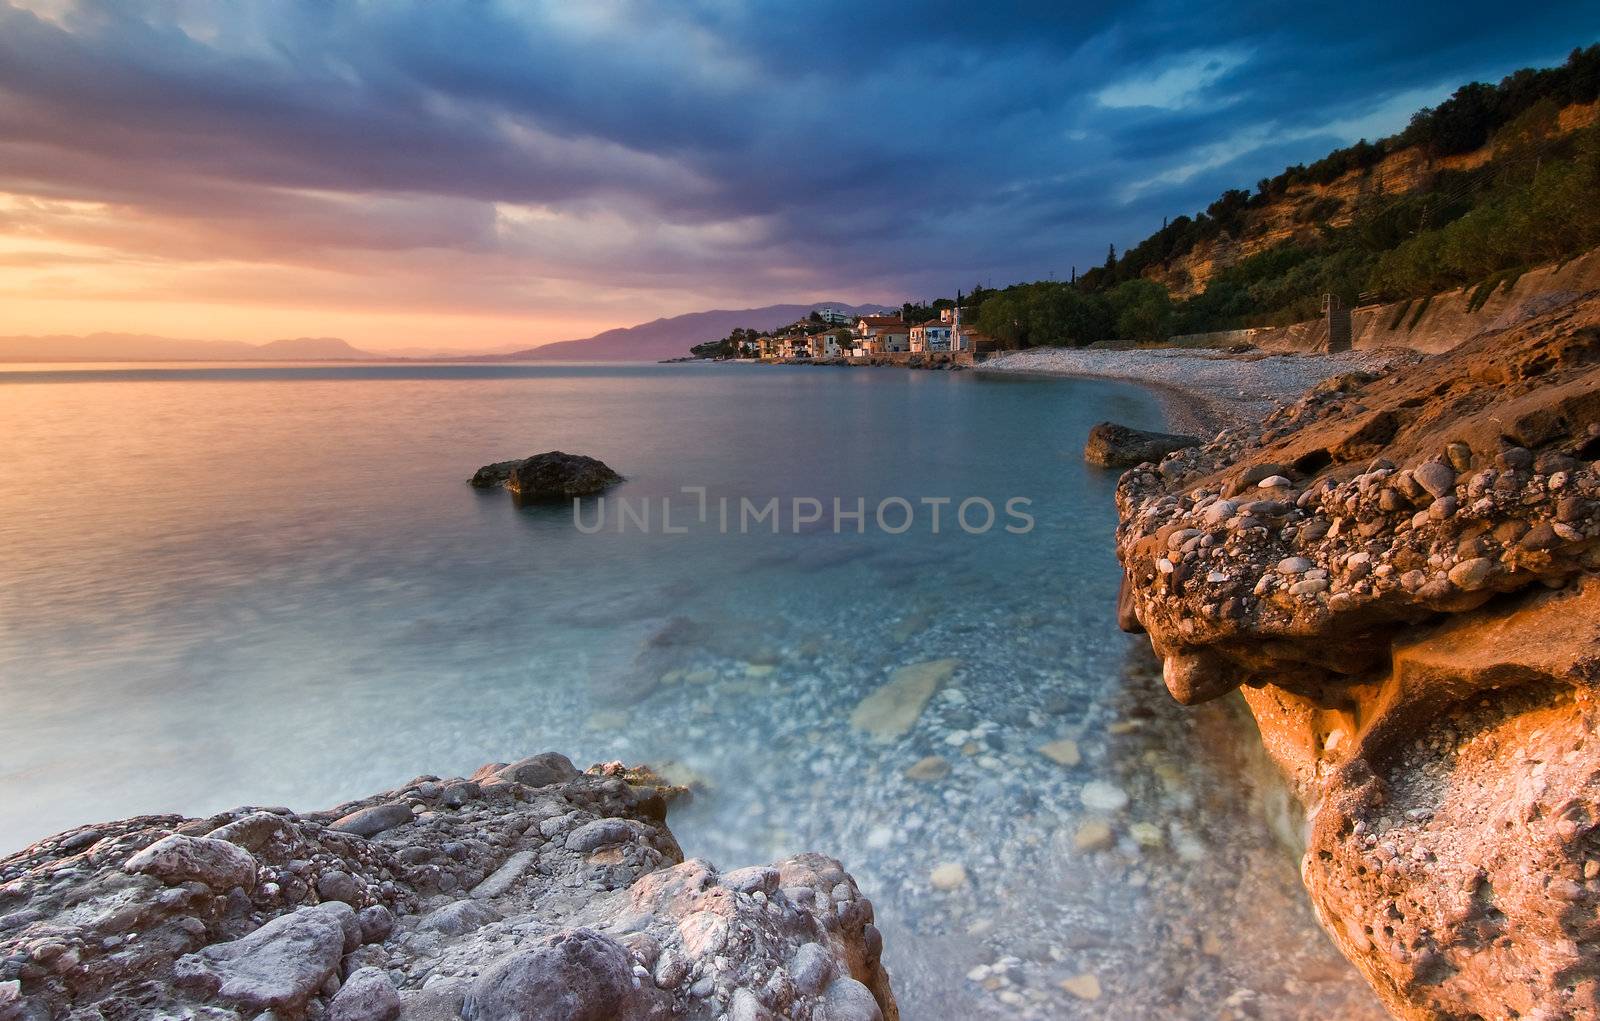 The beach at the fishing village of Akrogiali, southern Greece, photographed during sunset